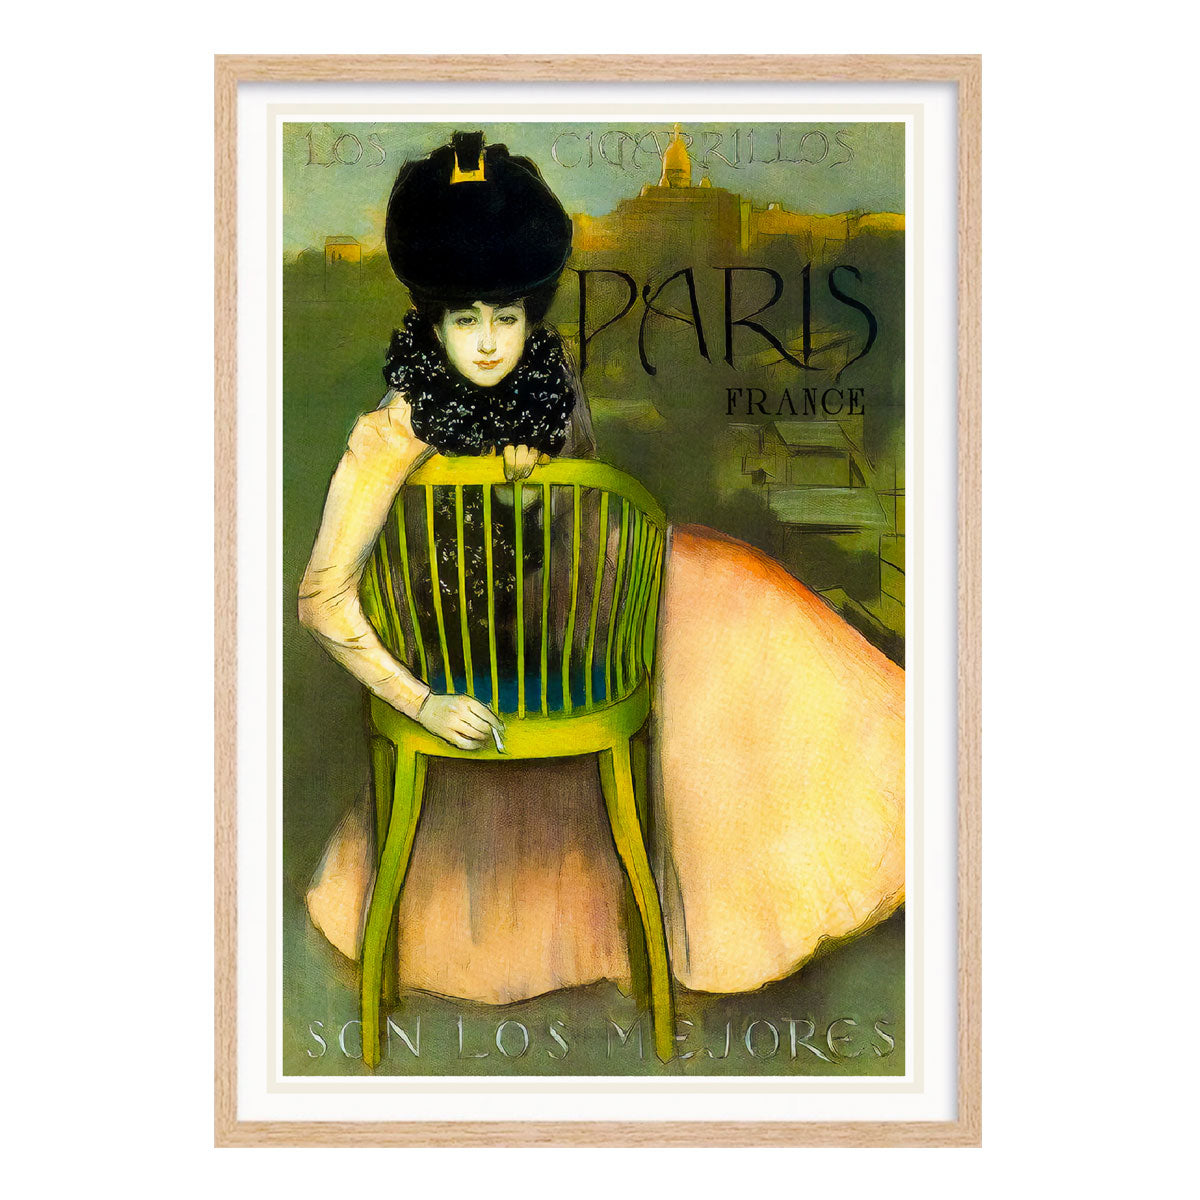 Paris France travel advertising retro poster print in oak frame from Places We Luv